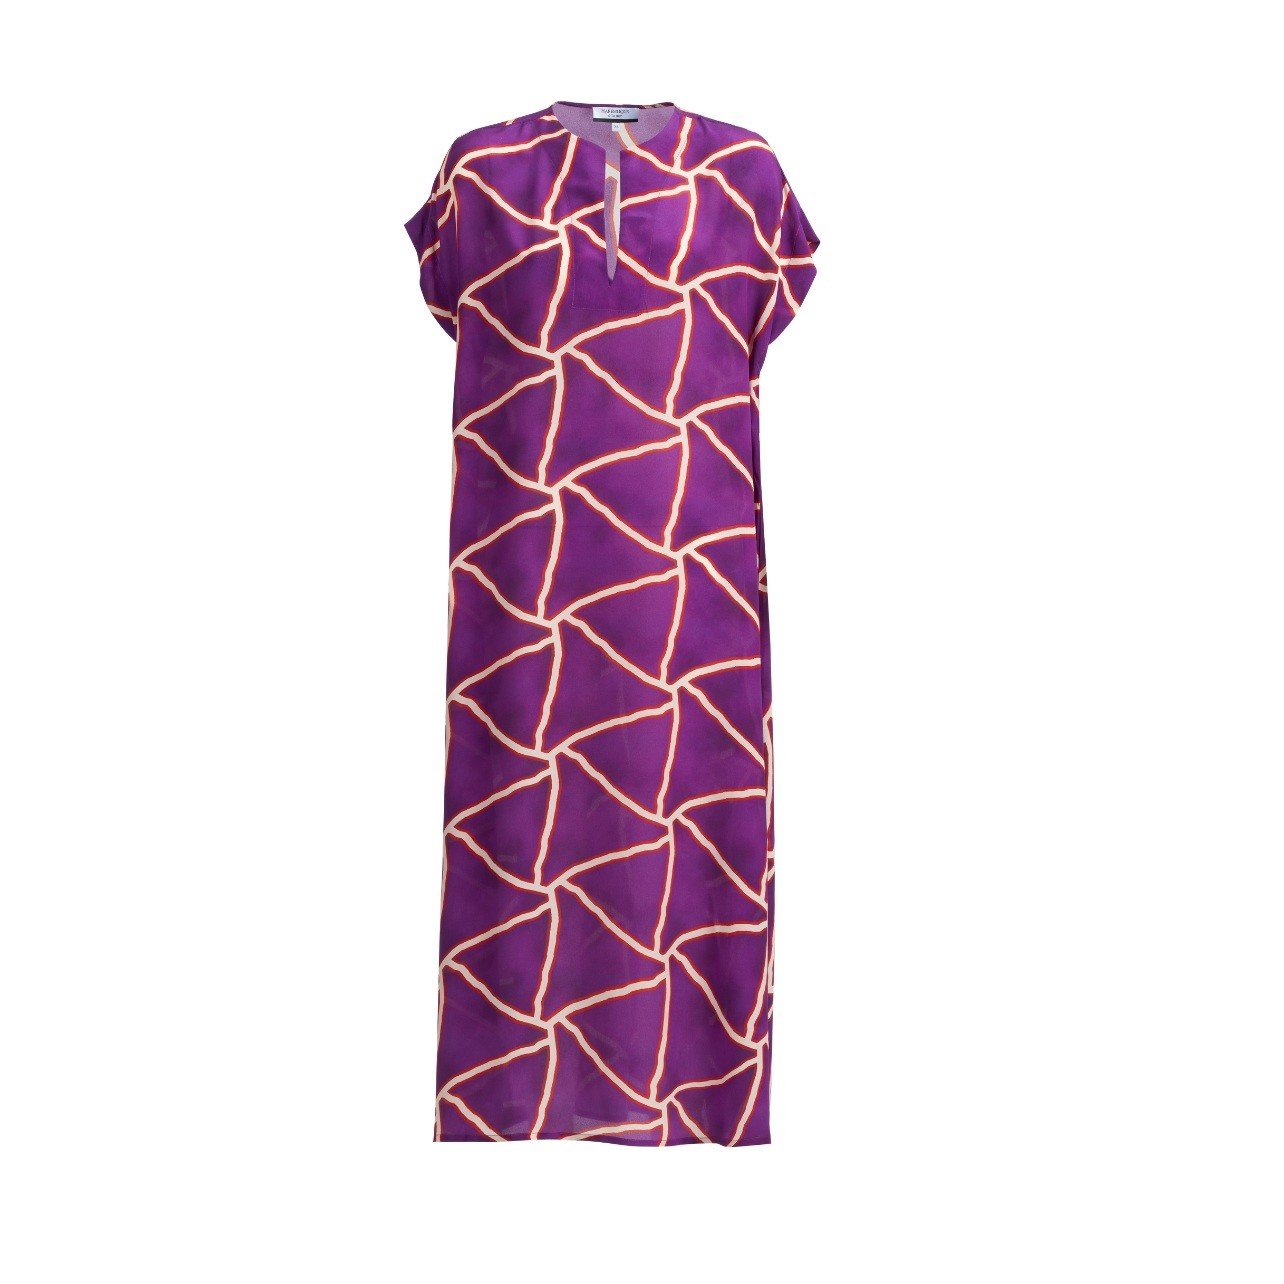 Haremlique purple kaftan with a pattern inspired by the reflection of the sunset